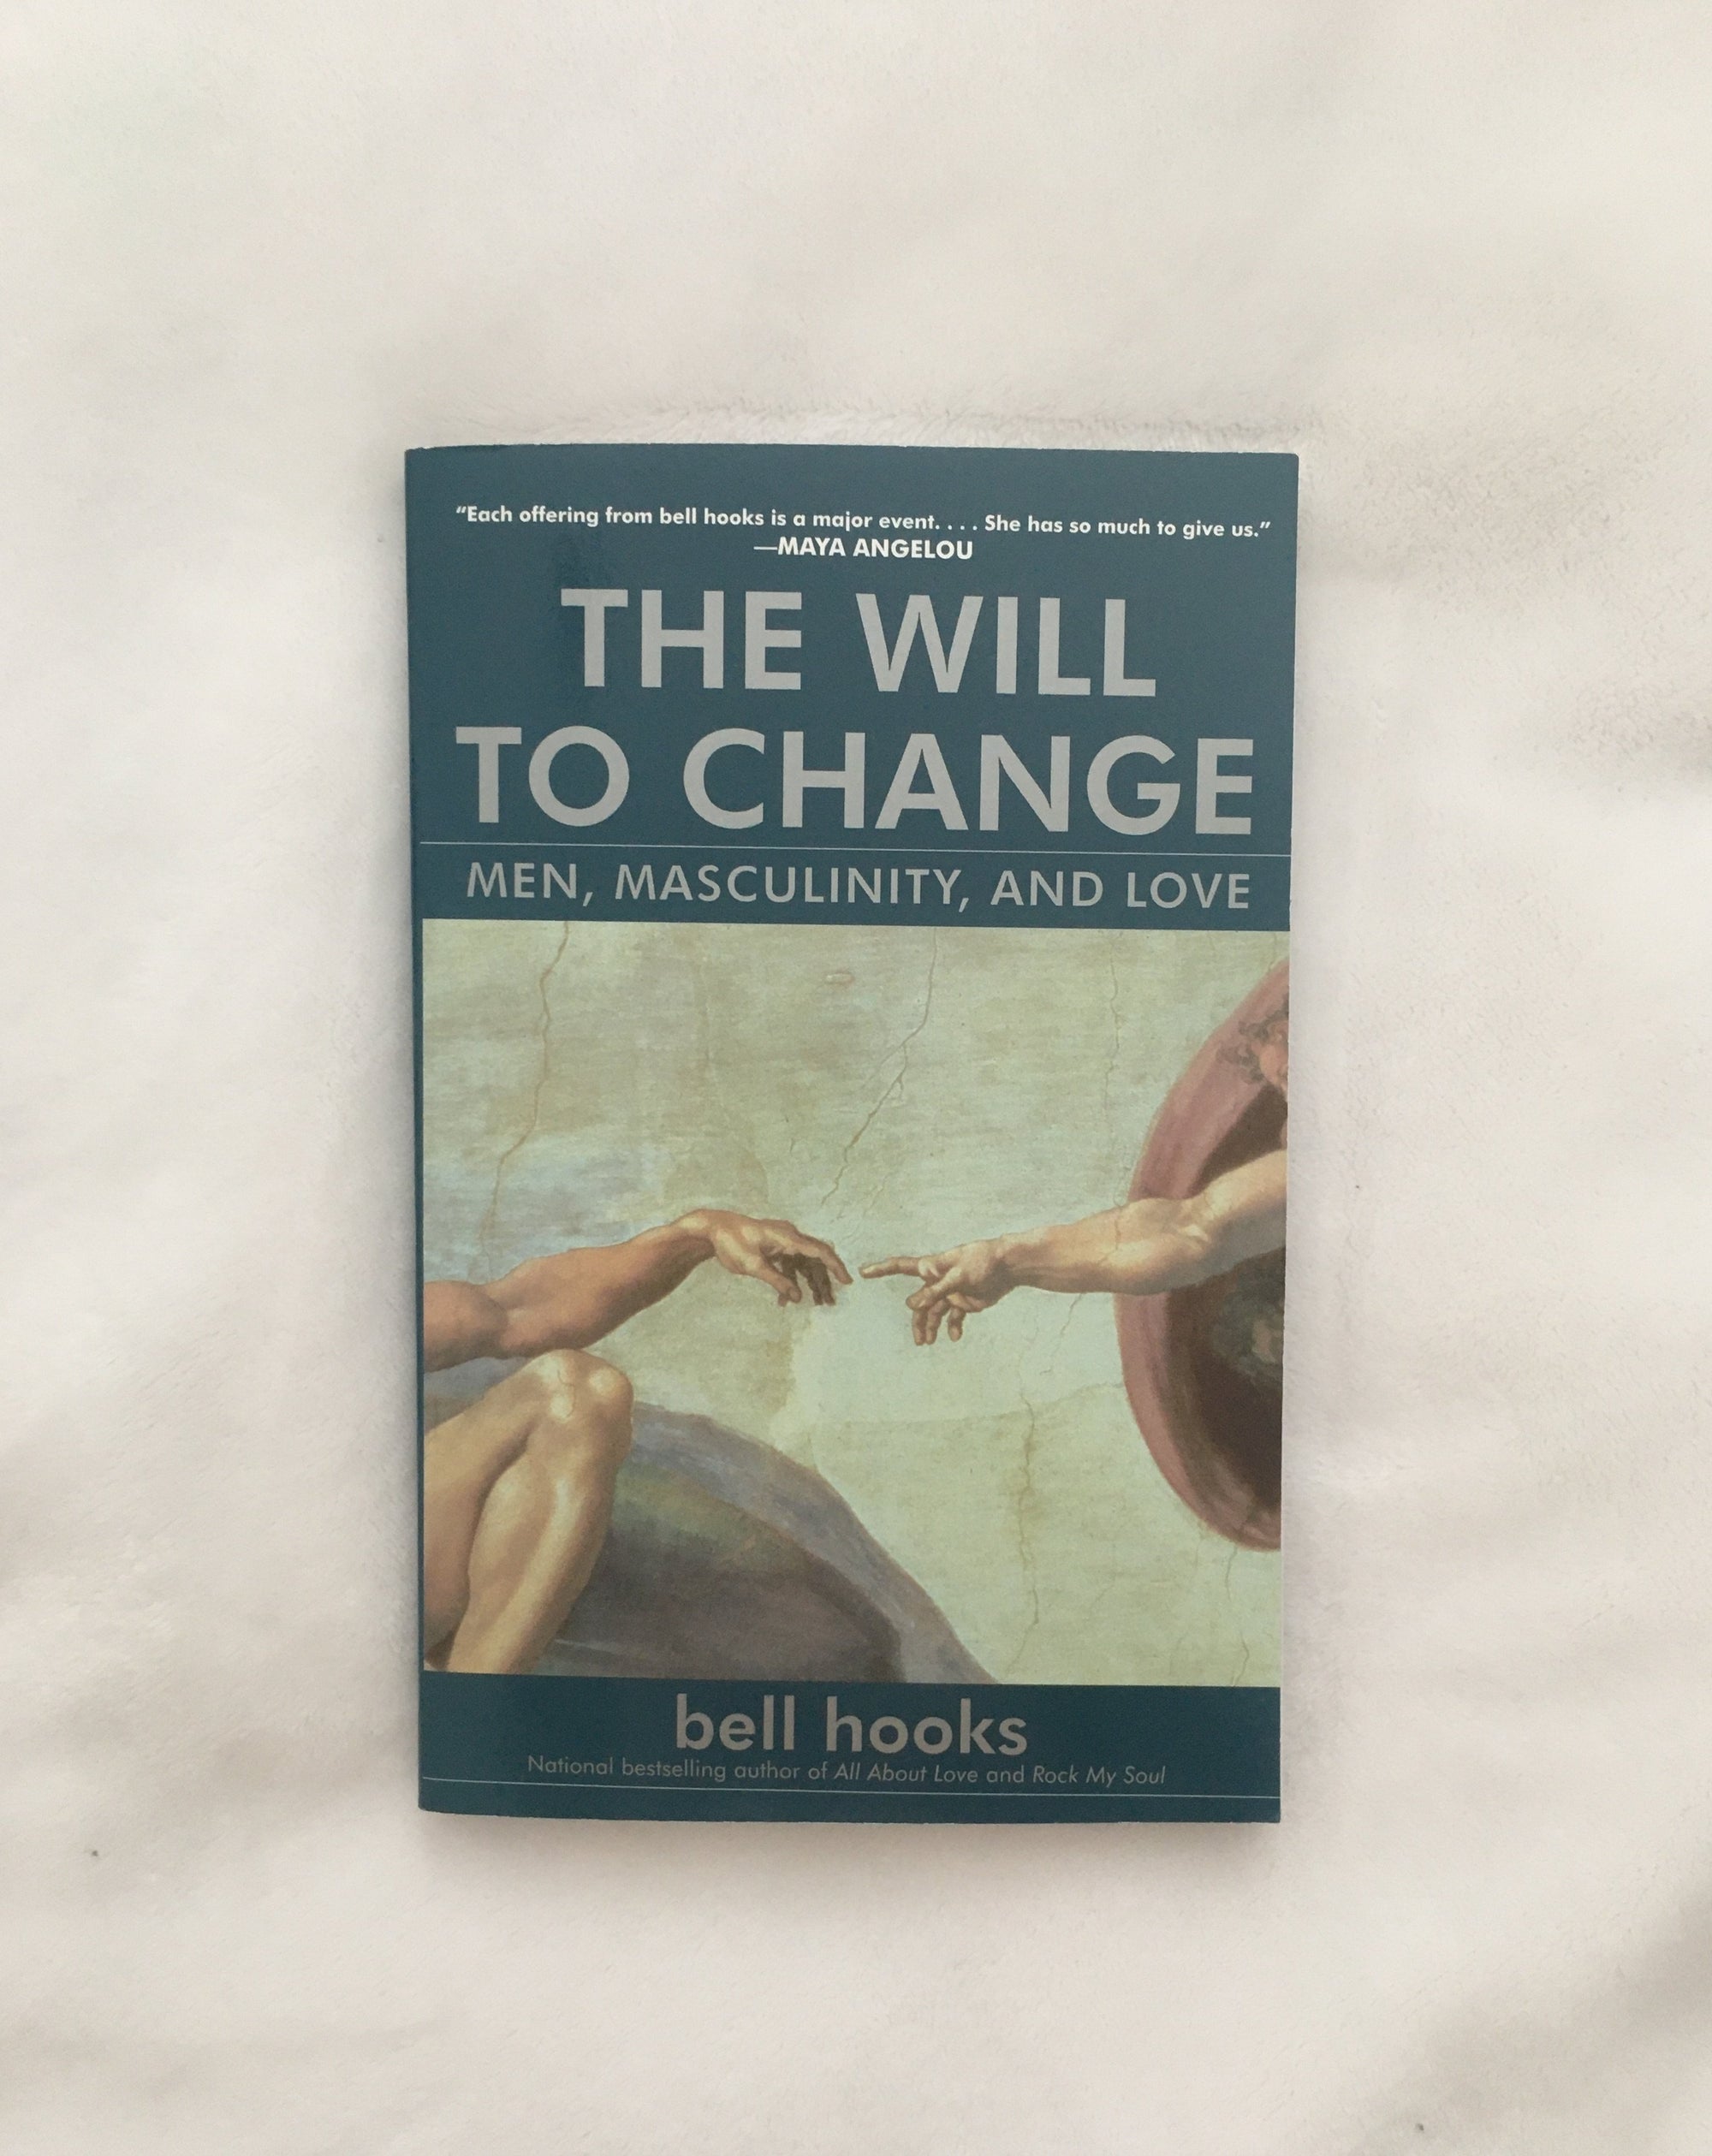 The Will to Change by bell hooks, book, Ten Dollar Books, Ten Dollar Books